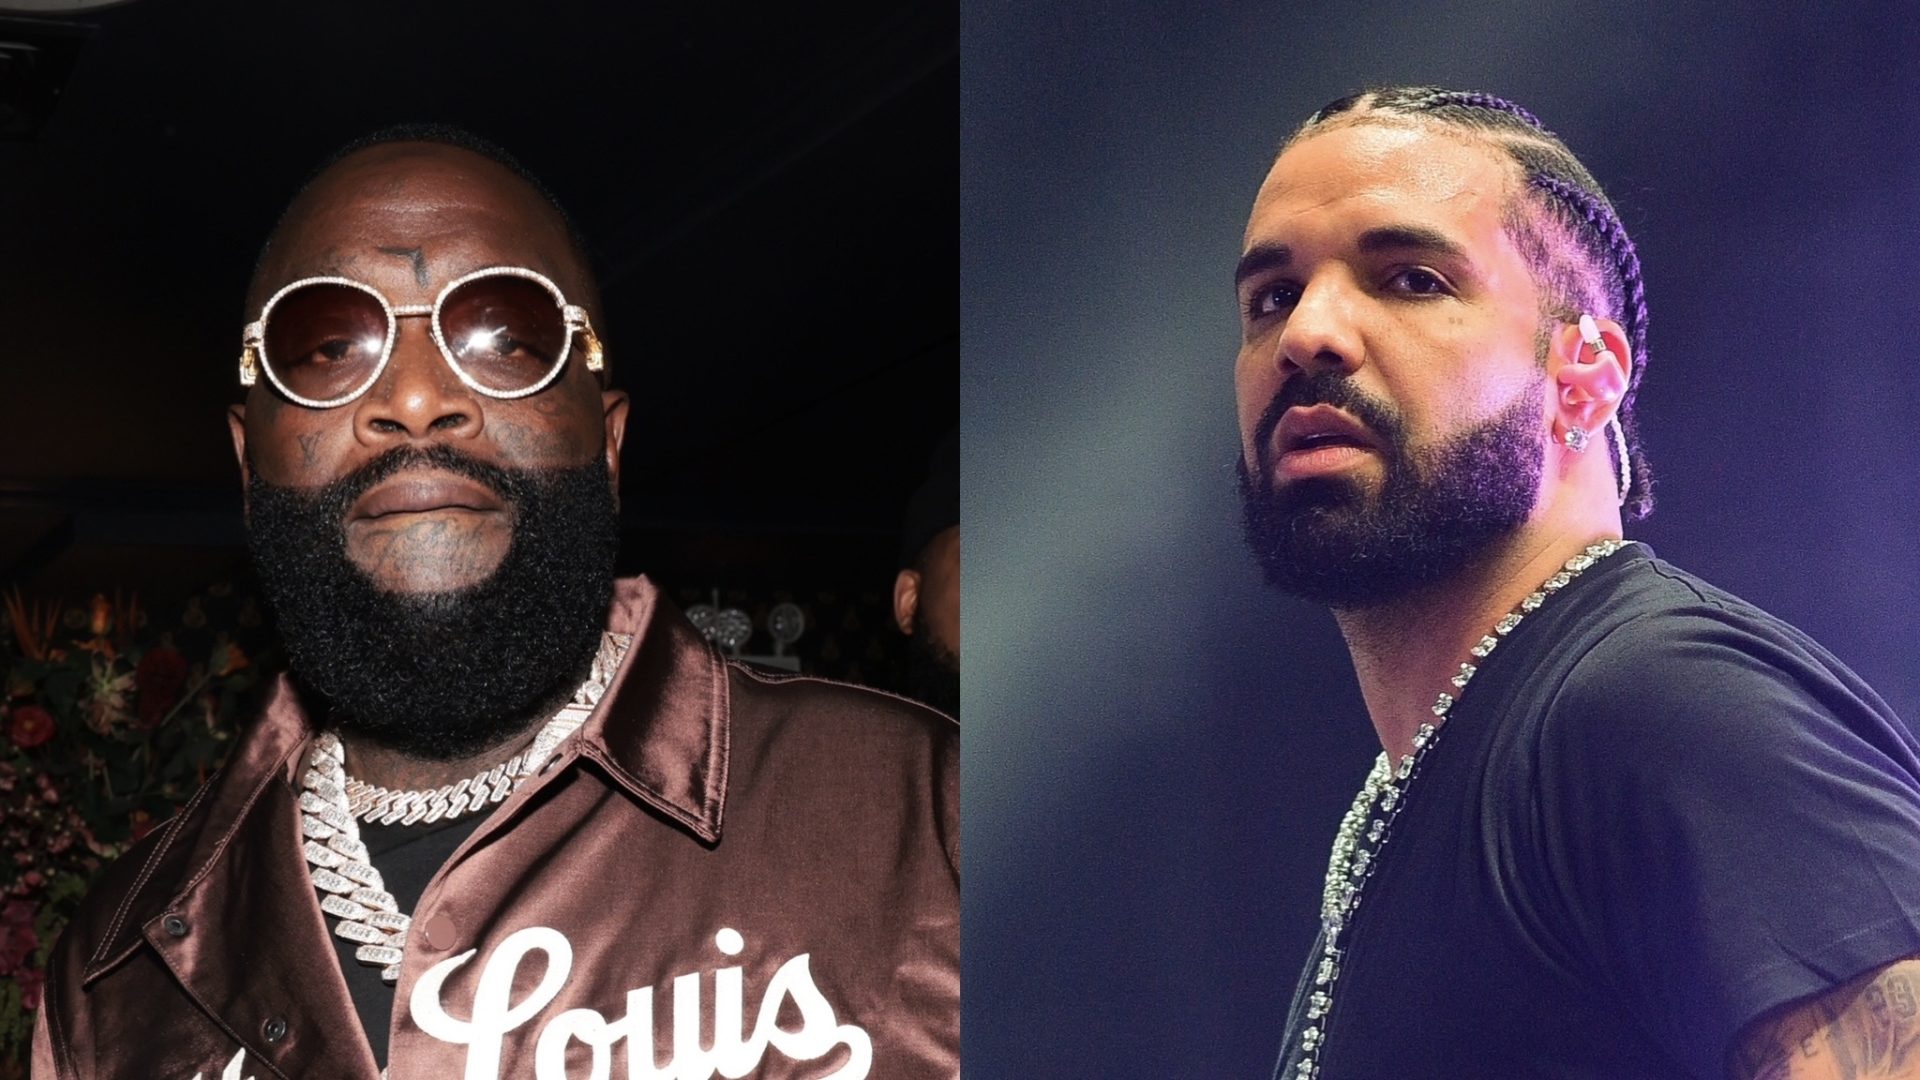 Rick Ross Shares Words After Drake Posts Photo Of Their DMs